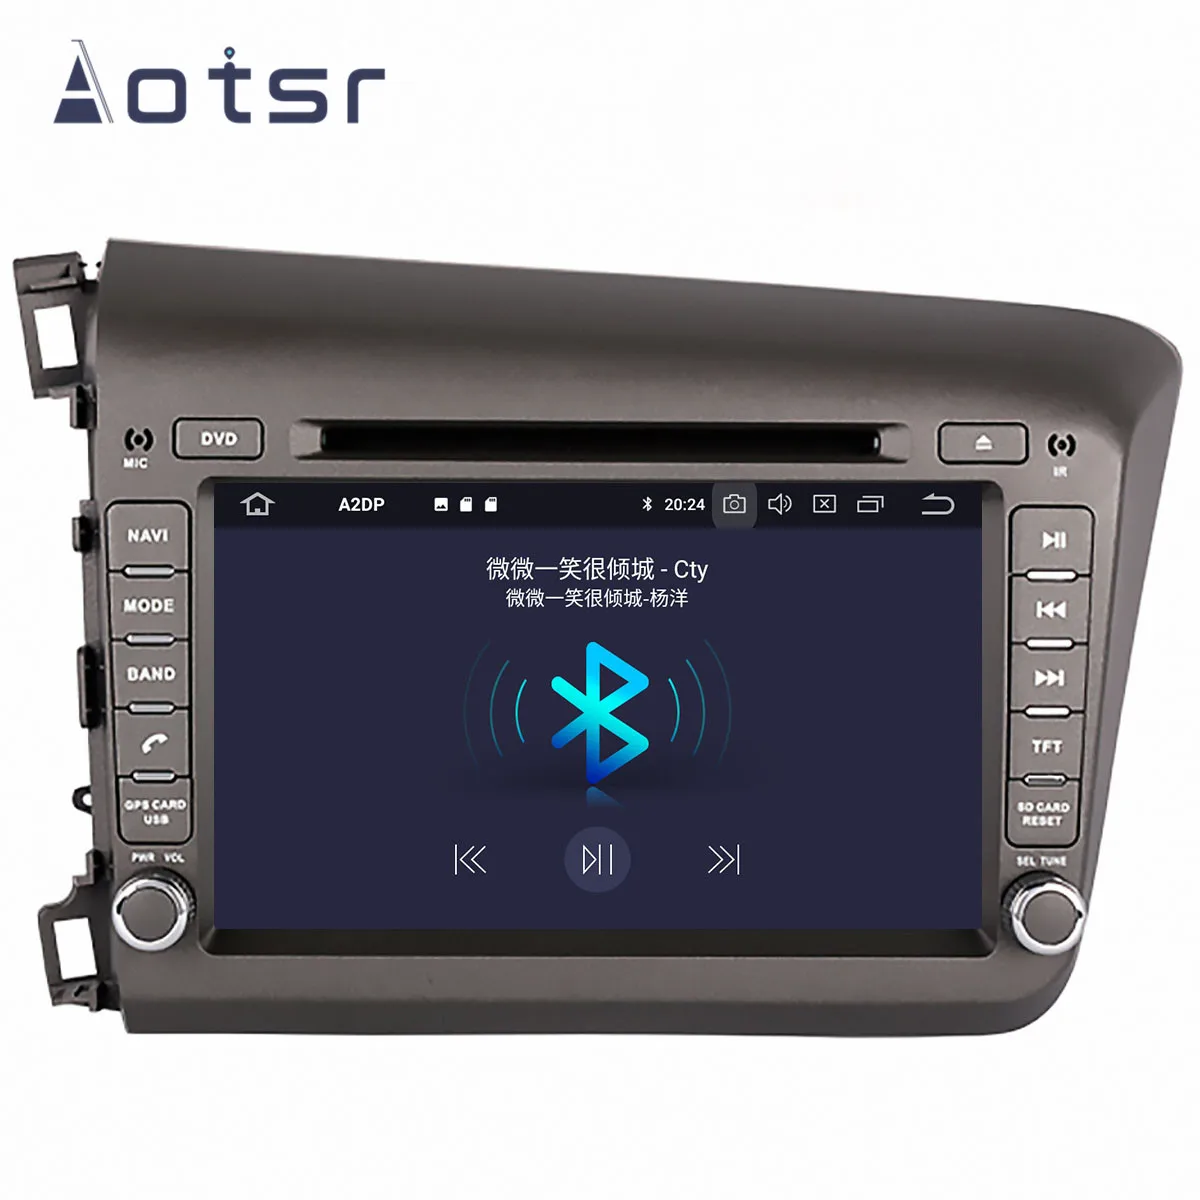 Clearance 7” Android 9.1 IPS Car Radio Player GPS Navigation For Honda civic 2012 2013 2014 2015 Recorder Head Unit Multimedia Player 3